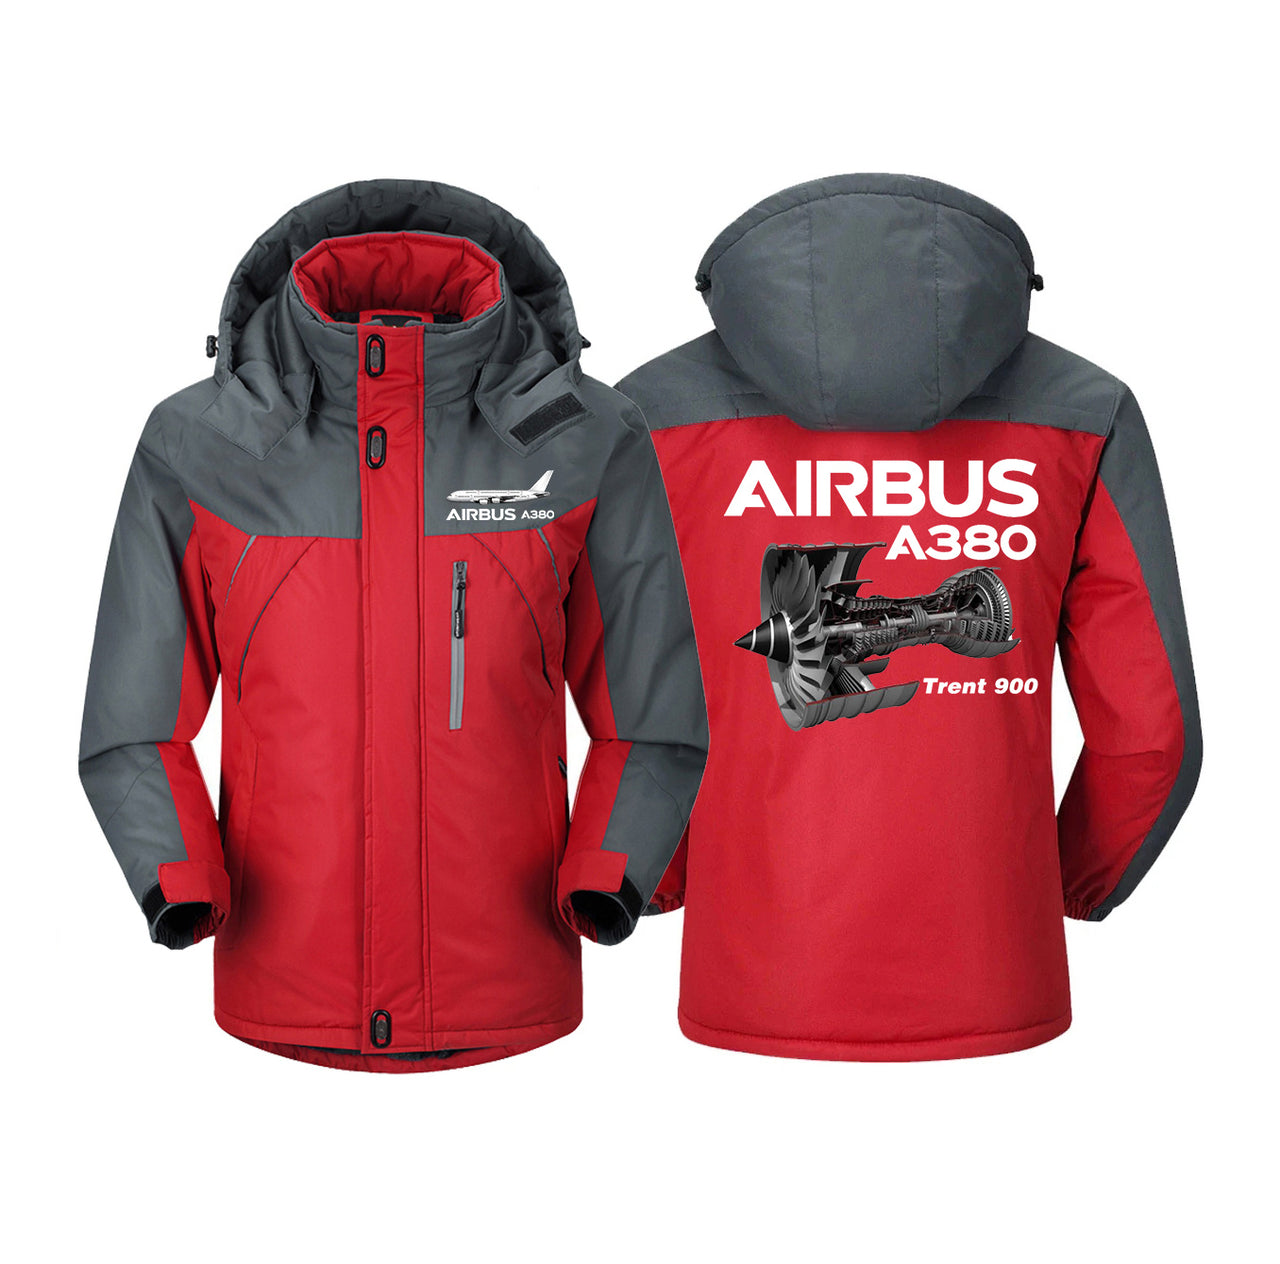 Airbus A380 & Trent 900 Engine Designed Thick Winter Jackets